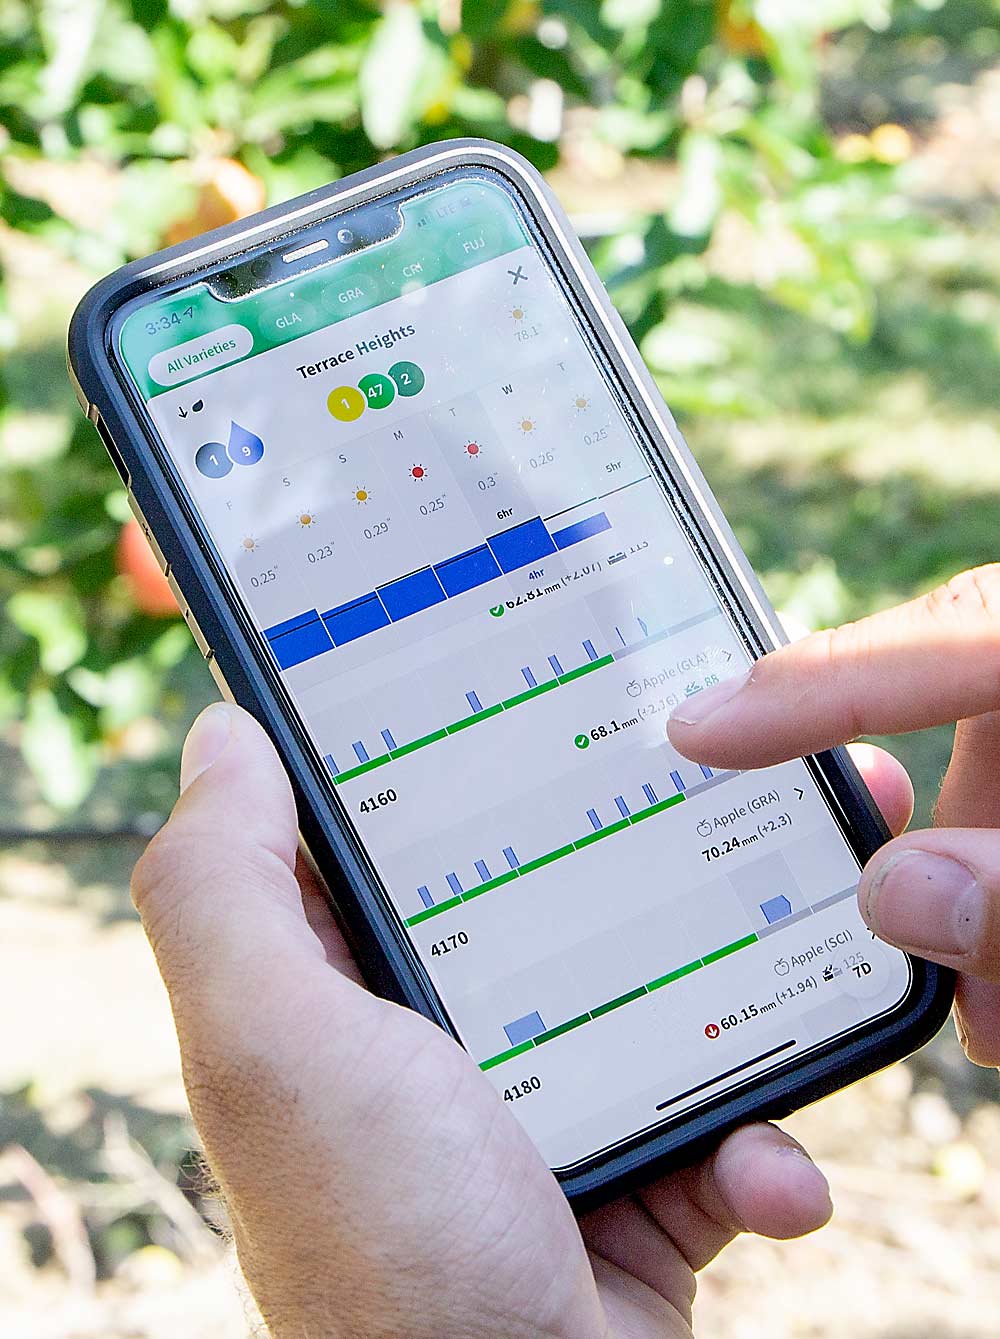 Israeli agriculture technology company Phytech offers growers an app that combines information from trunk dendrometers and fruit calipers, which measure growth rates and water-stress-driven fluctuations in those growth rates, with more common irrigation management metrics, such as tracking water applied and weather conditions, to help growers get more “visibility” about how they are irrigating and how their trees are responding, said Travis Klicker from Phytech. (Kate Prengaman/Good Fruit Grower)